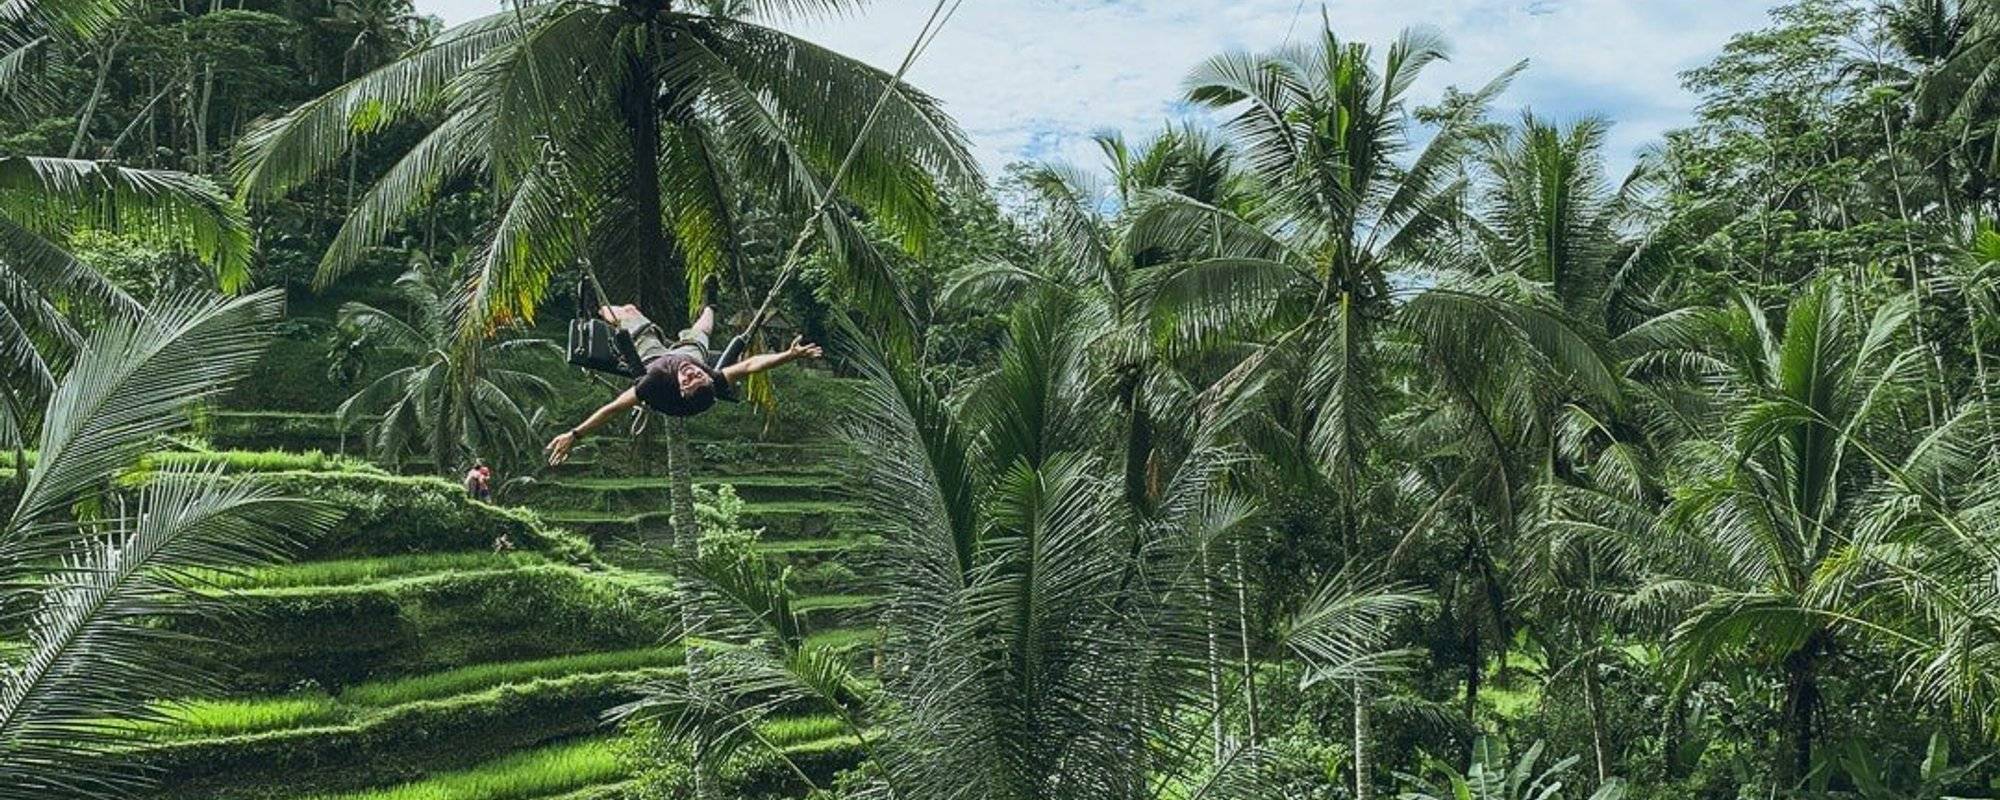 Swinging over the Tegalalang Rice Terraces with Mystery Girl - Bali, Indonesia